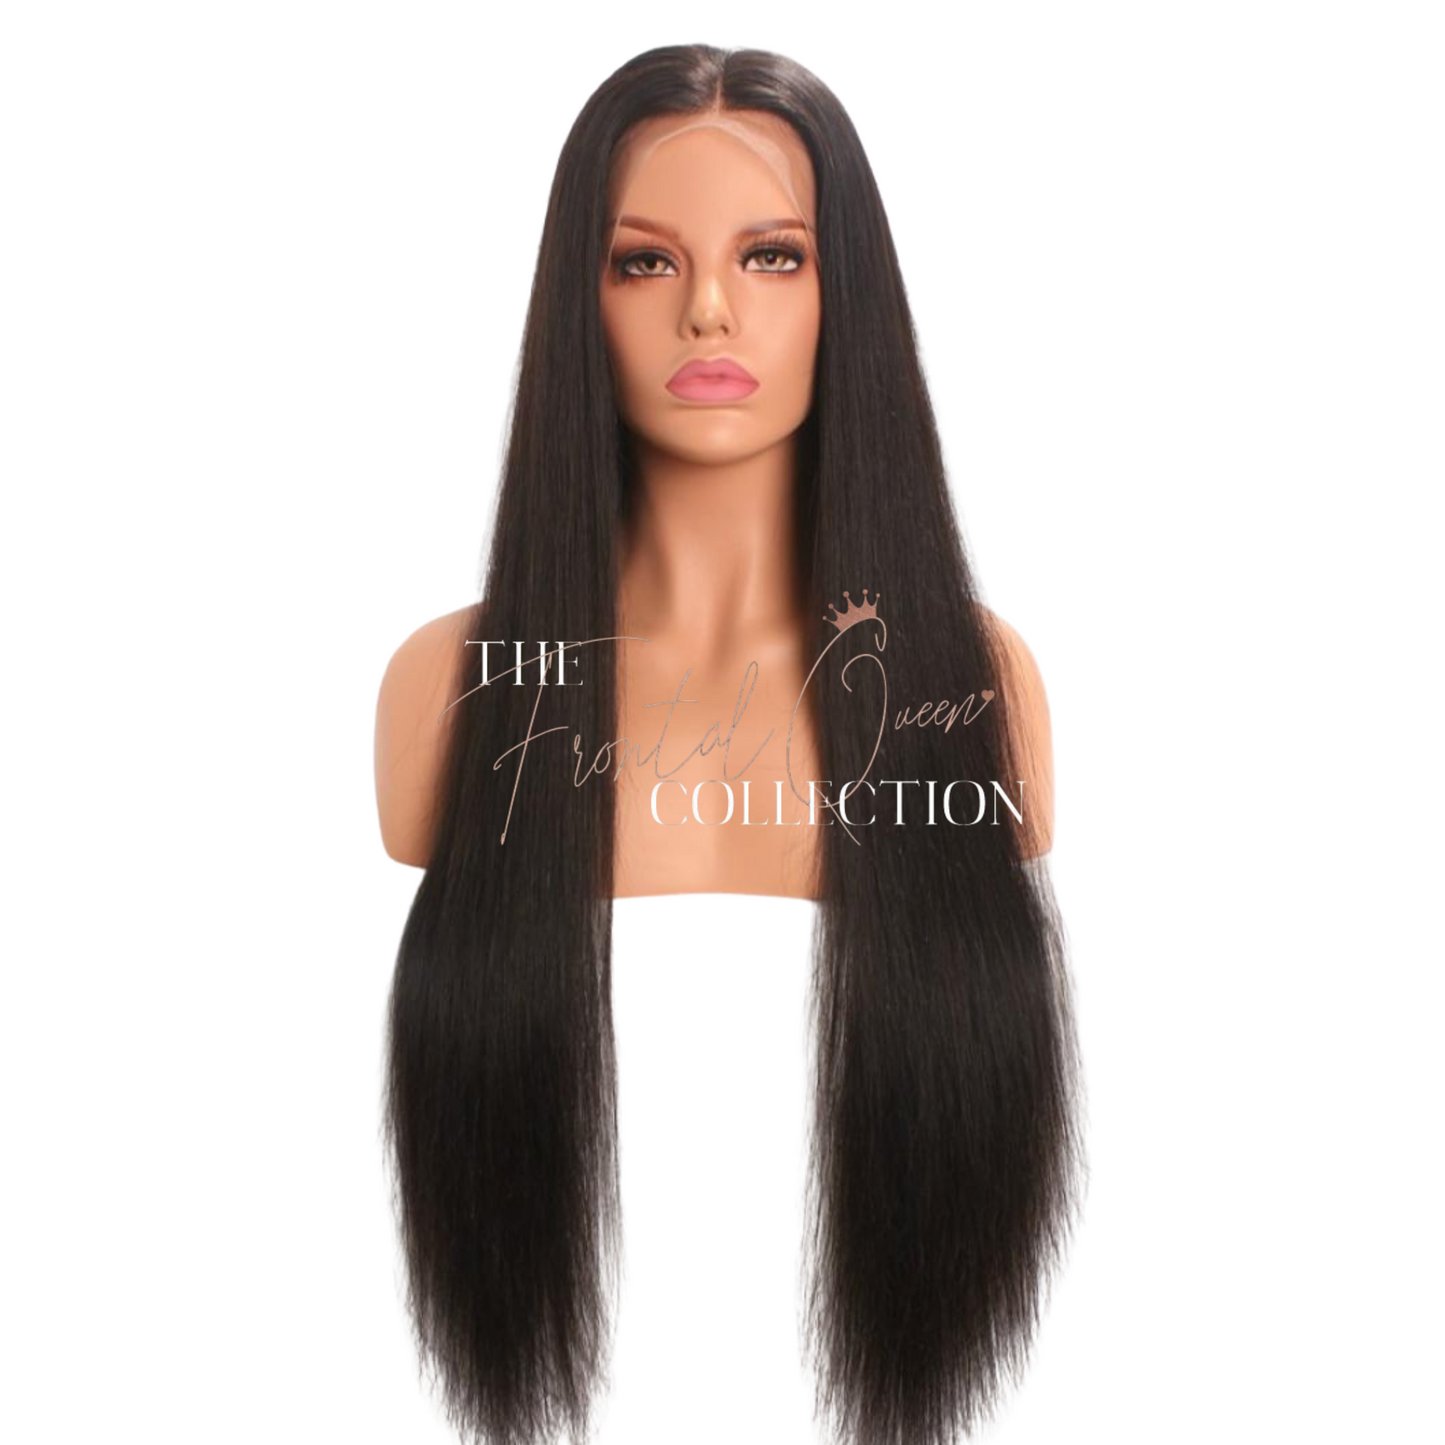 Newbie Cambodian Straight Frontal Wig - The Frontal Queen